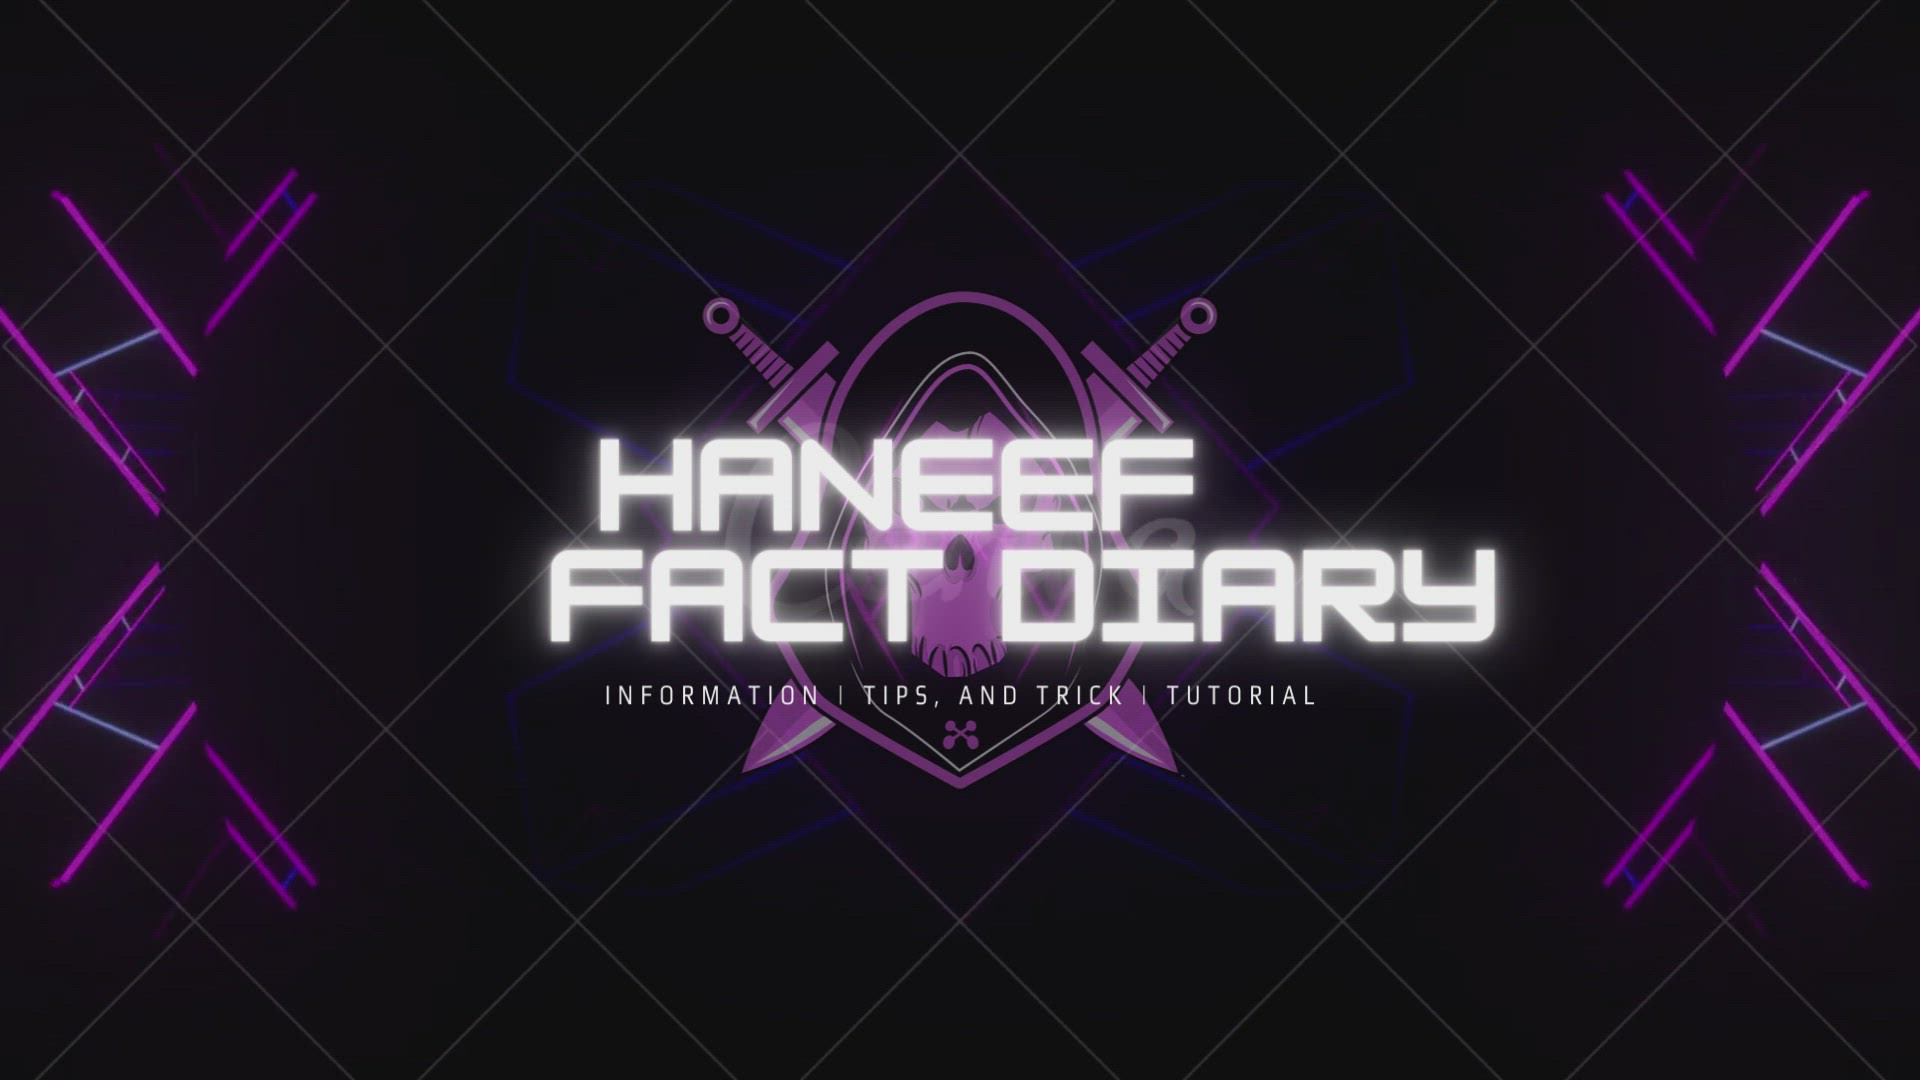 'Video thumbnail for Haneef Fact Diary'